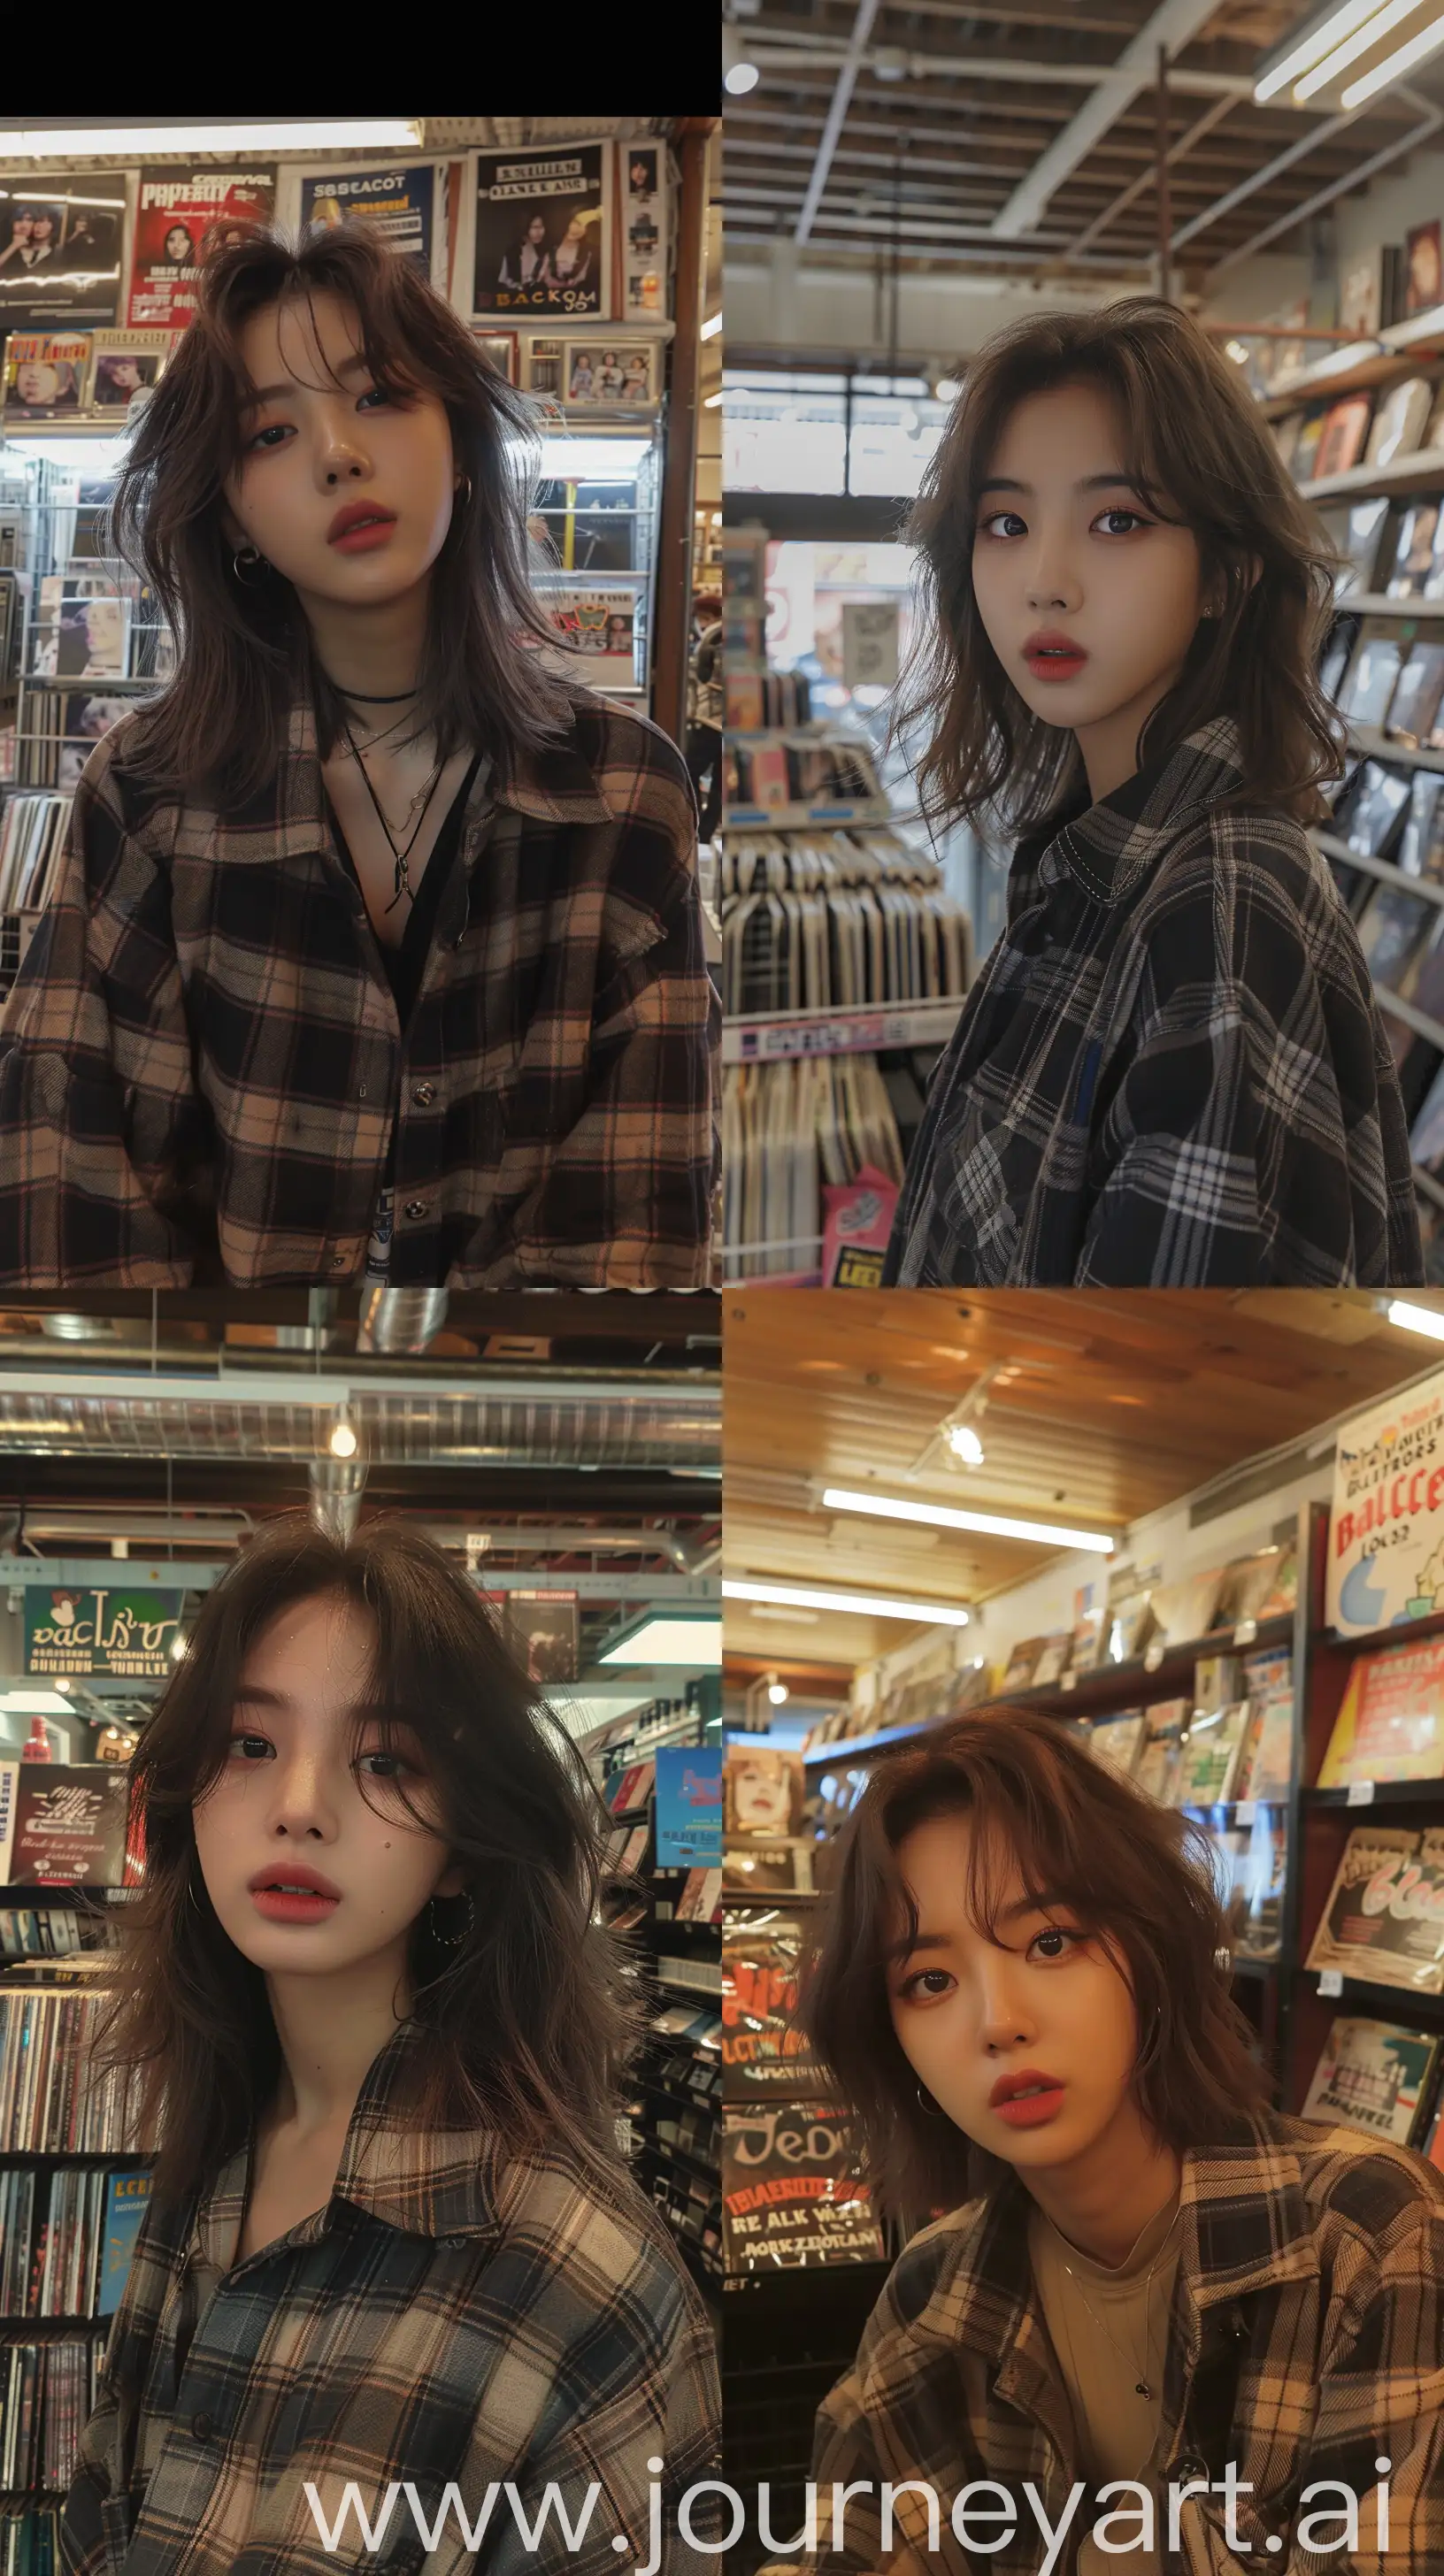 Blackpinks-Jennie-with-Grunge-Aesthetic-in-Album-Store